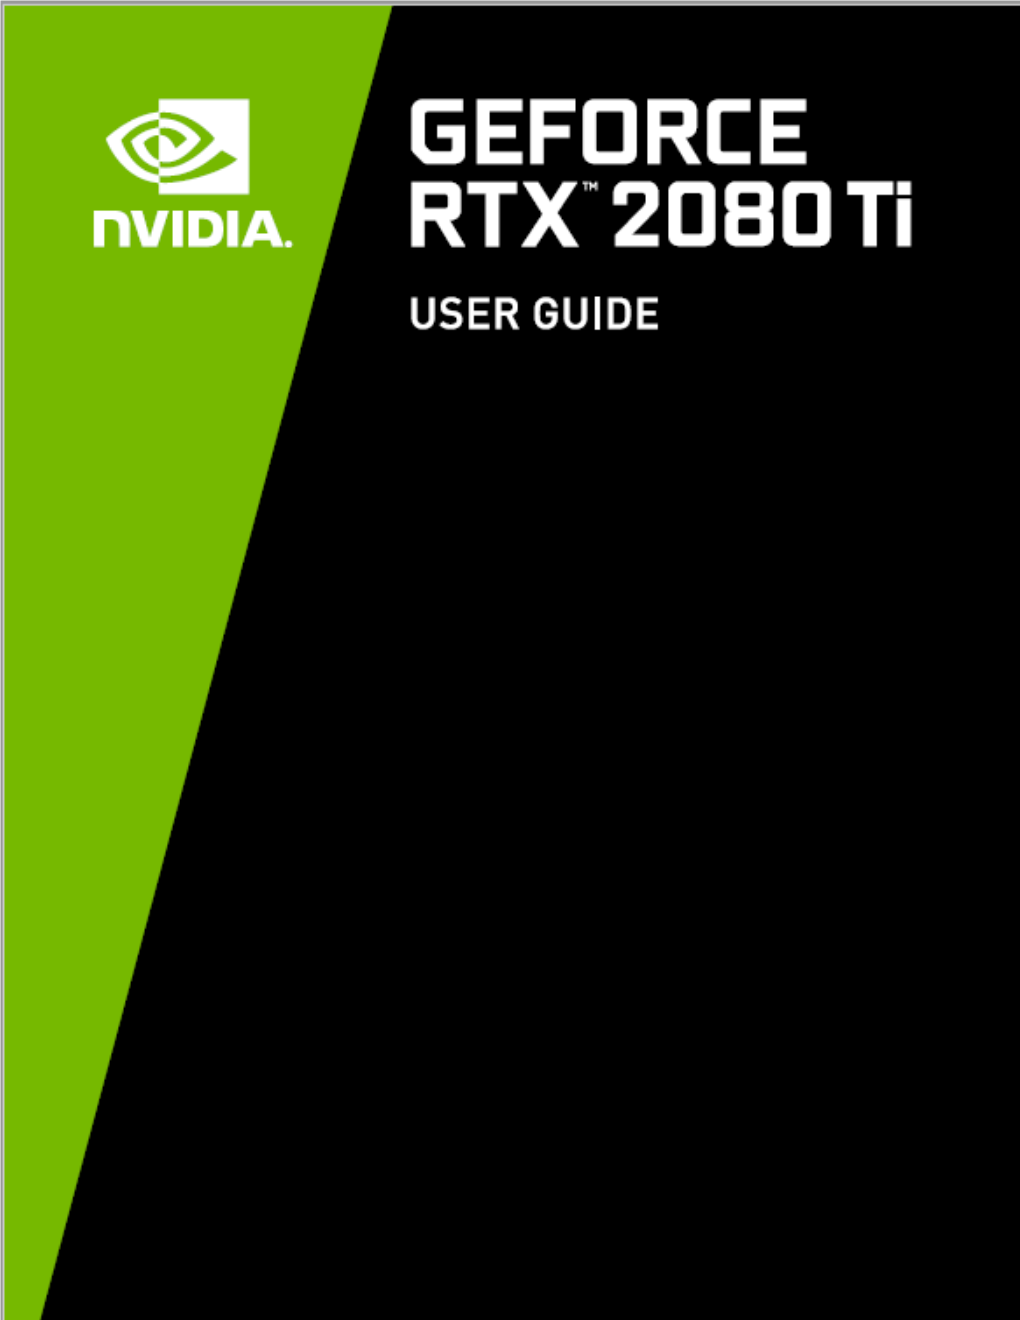 NVIDIA Geforce RTX 2080 Ti User Guide | 3 Introduction